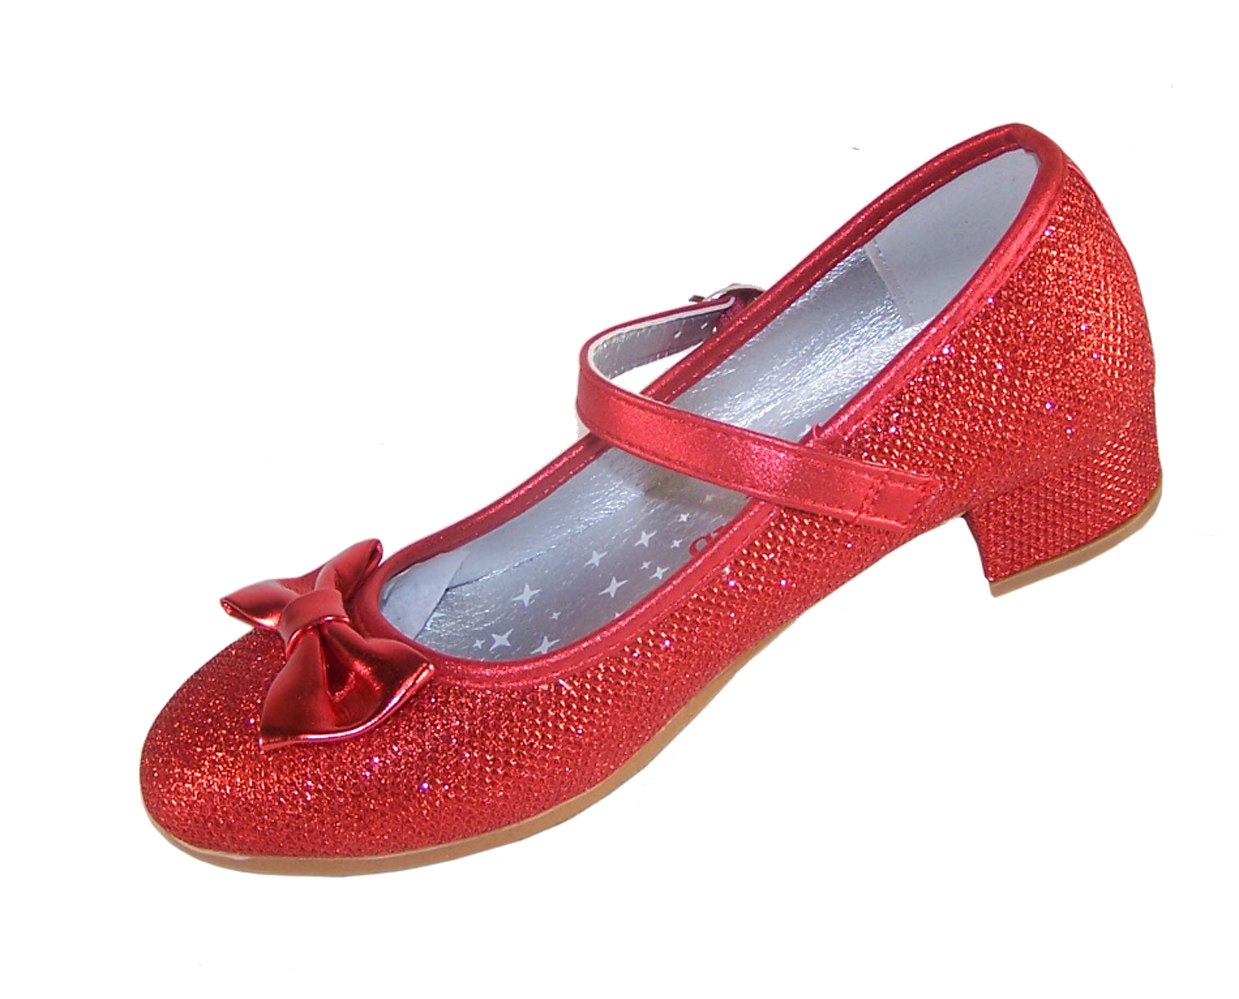 Girls red sparkly low heeled party shoes-3978